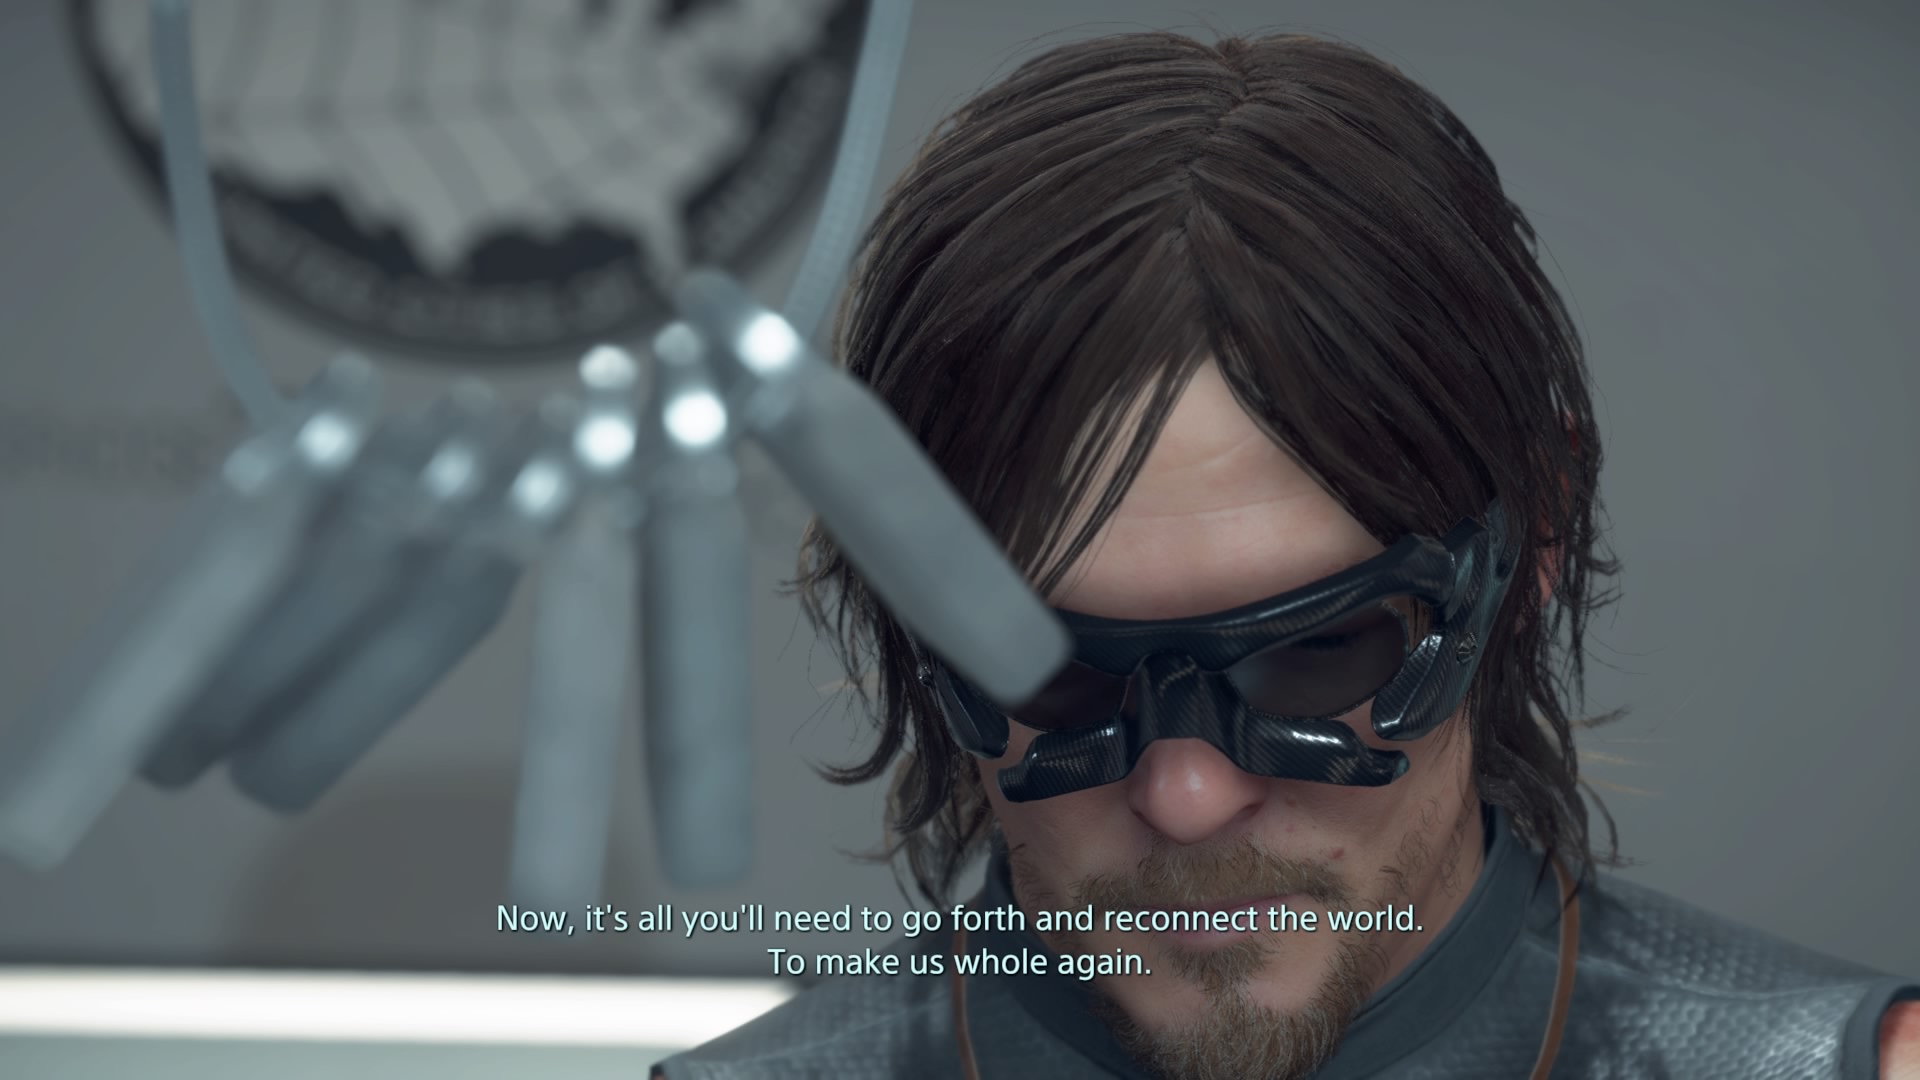 Death Stranding review: both breathtaking and boring - The Verge